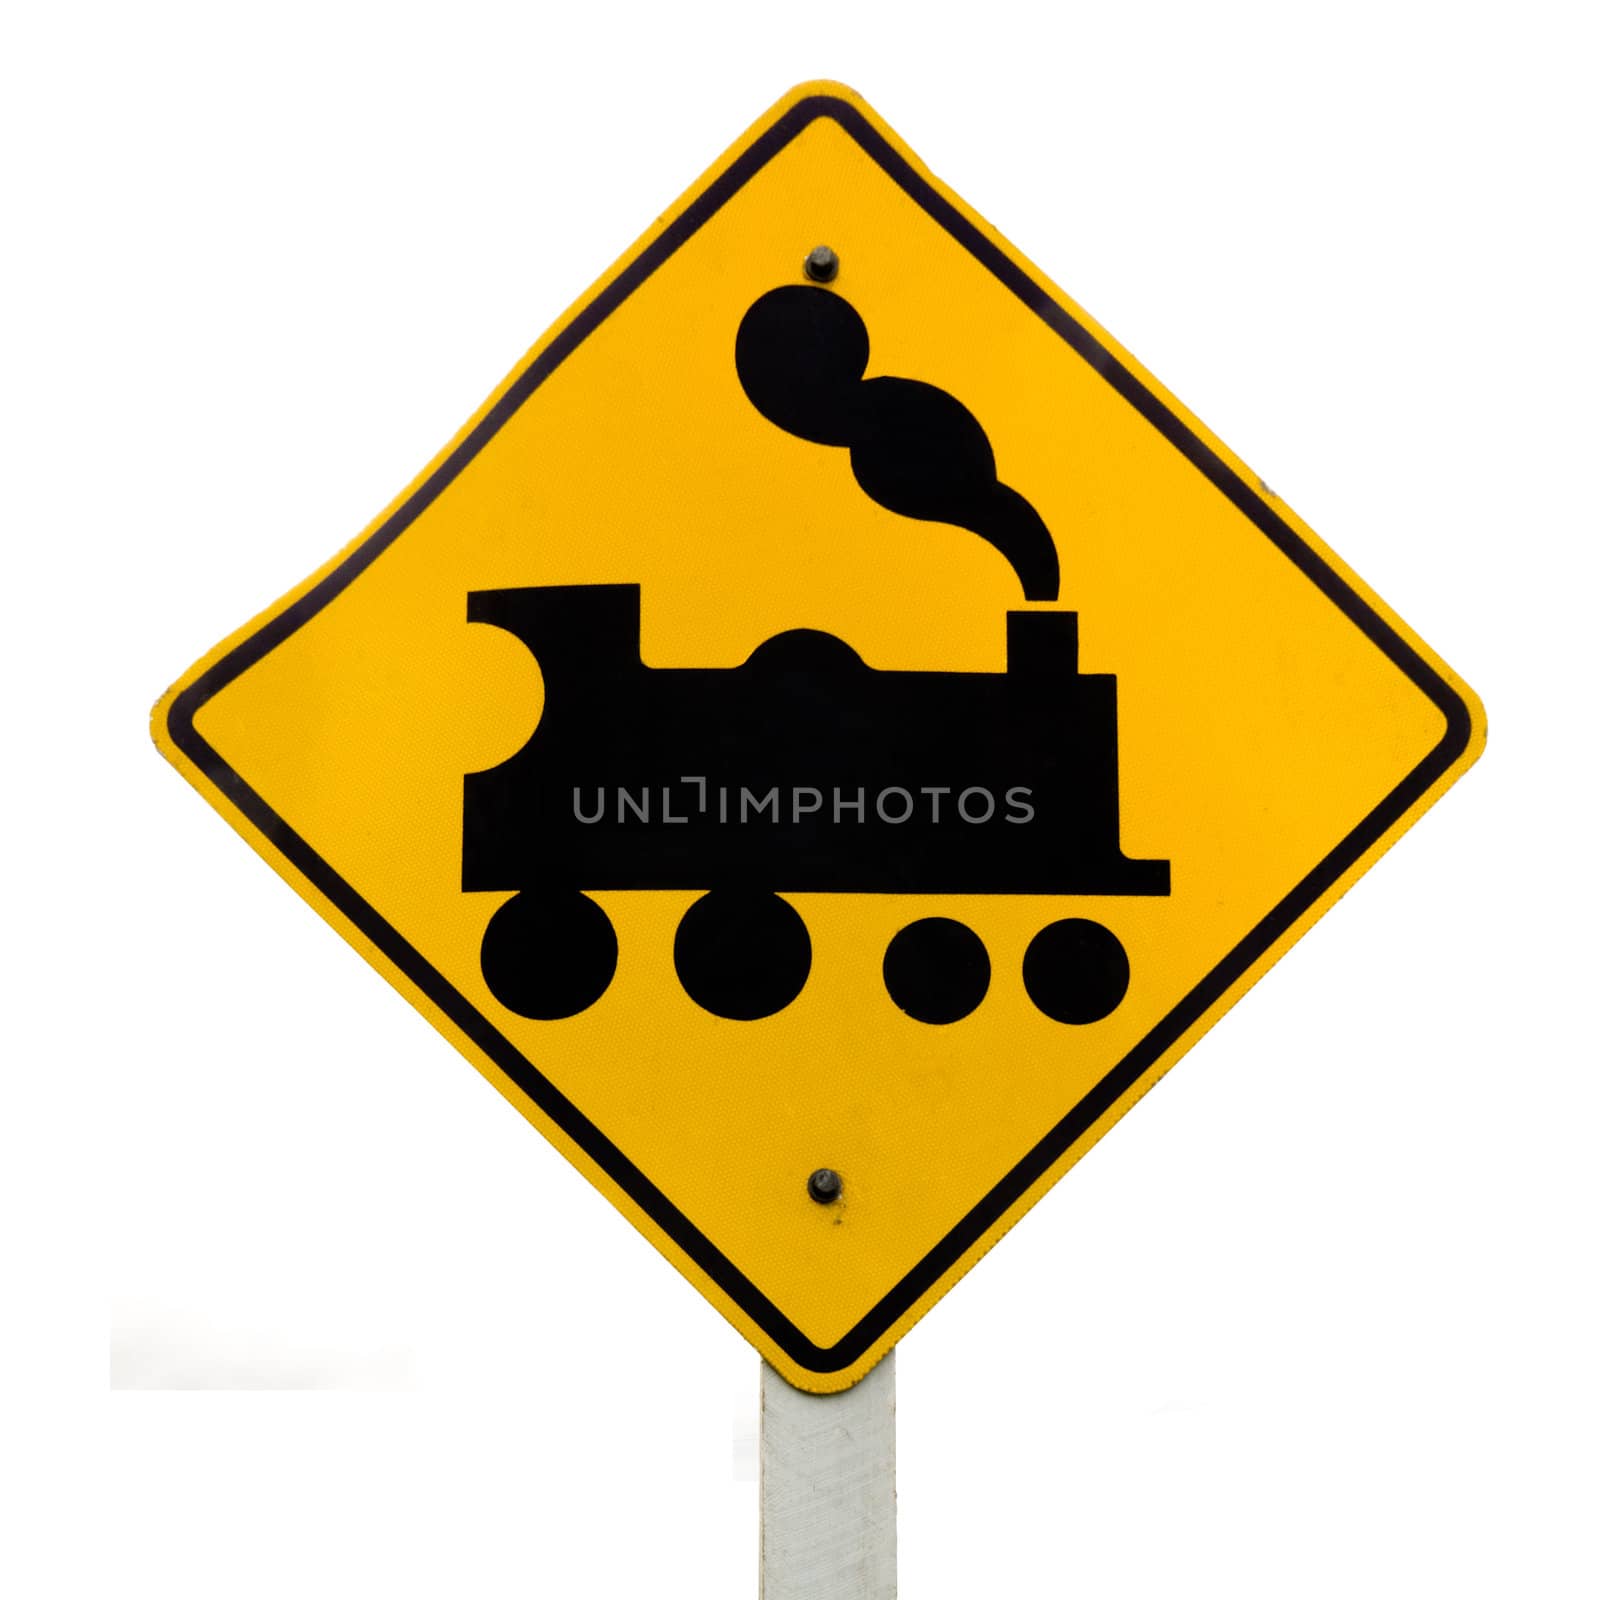 Railroad Crossing Roadsign, no barrier or gate ahead on road, beware of train steam engine locomotive signage road sign on signpost pole isolated on white background